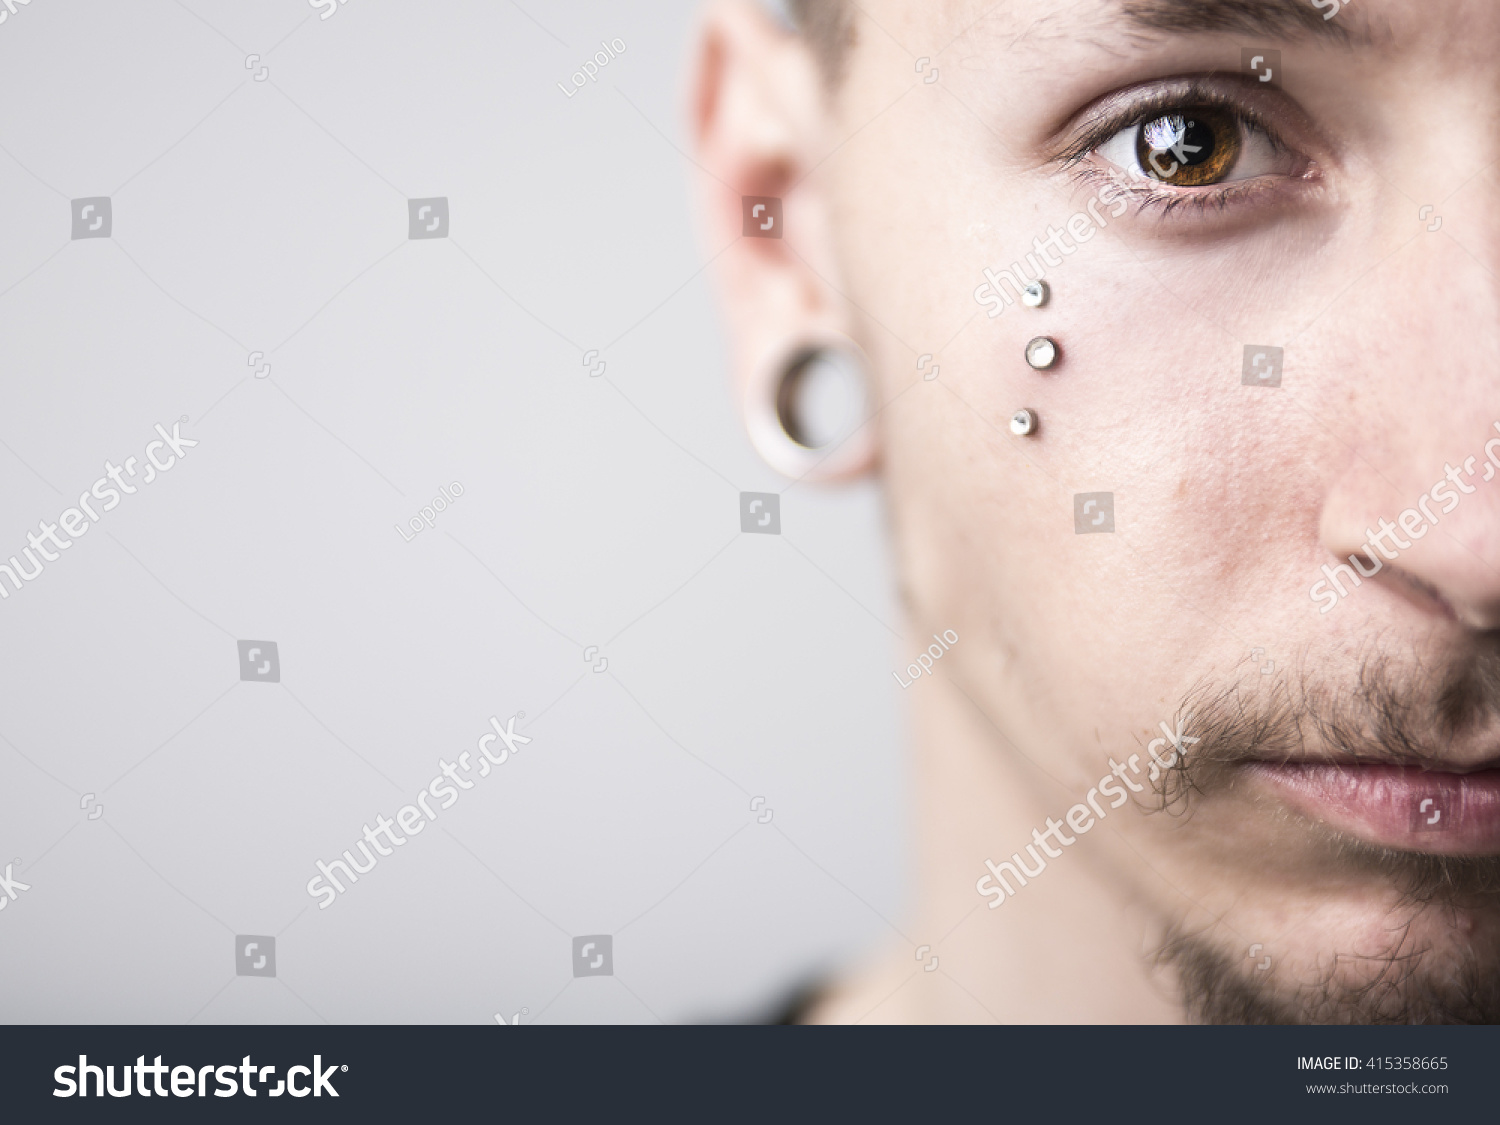 Handsome Stylish Young Man Tattoo Piercing Stock Photo 